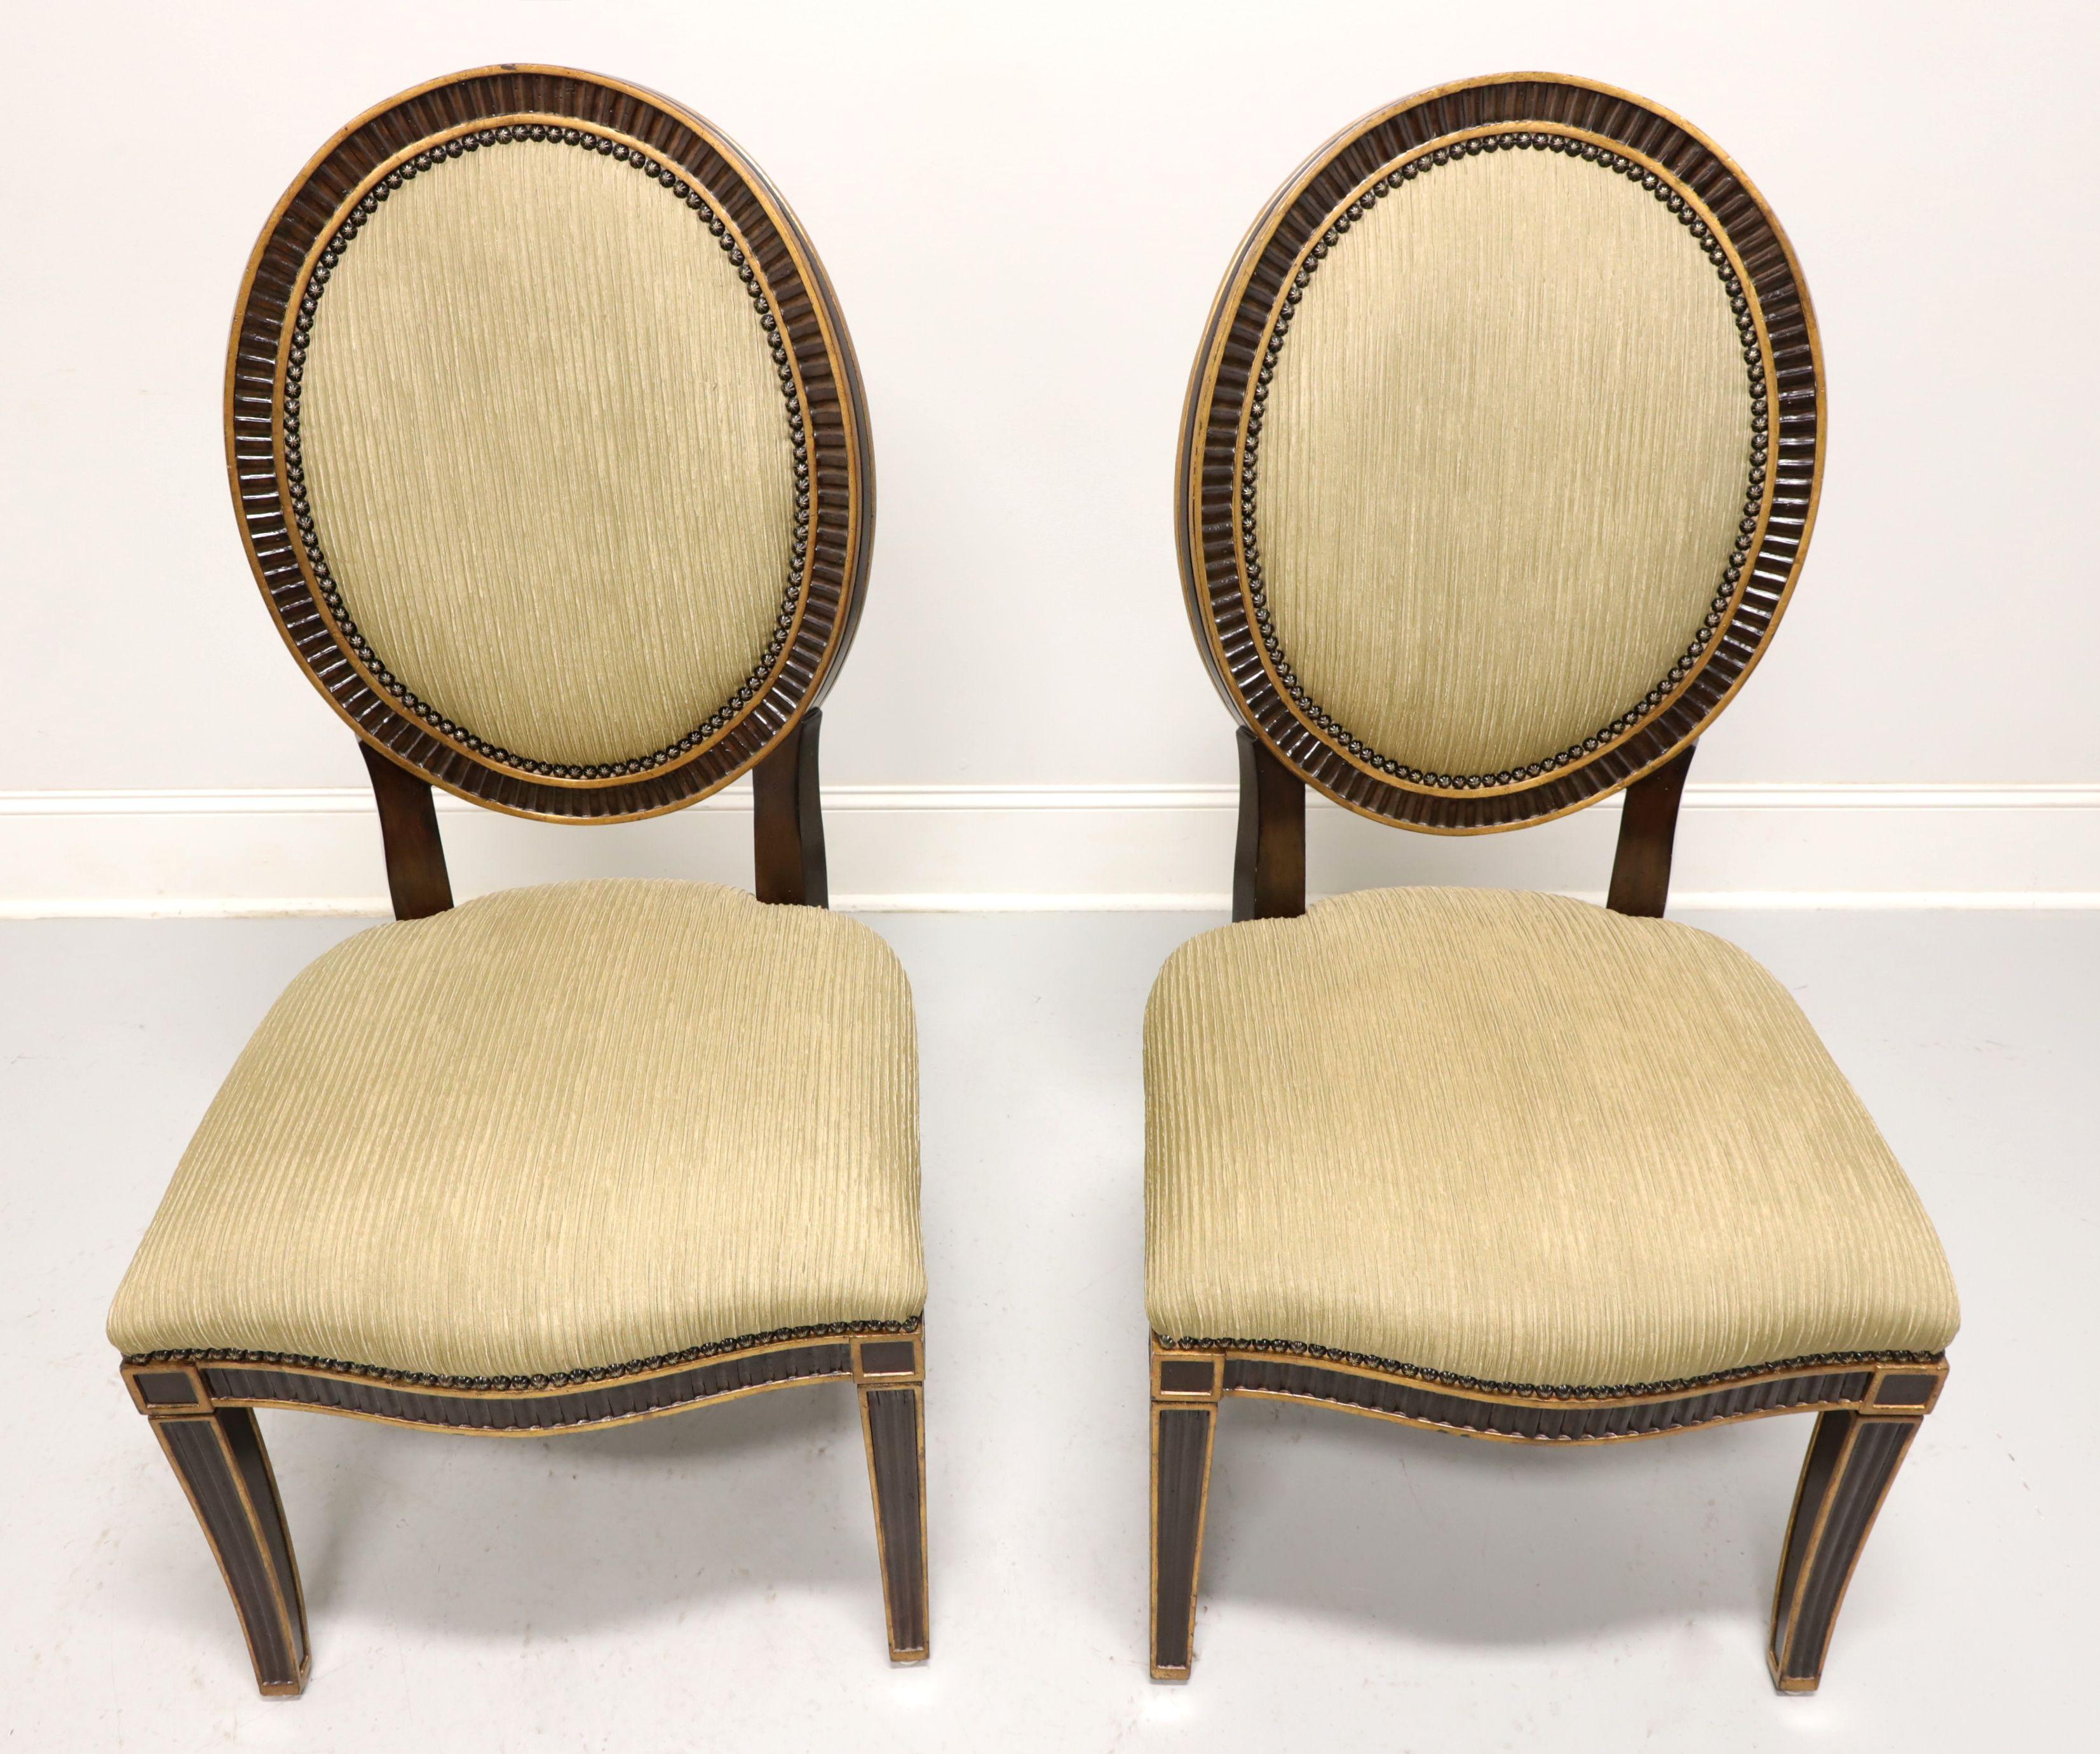 A pair of Contemporary French style dining side chairs by high-end furniture maker Marge Carson, of Pomona, California, USA, from their Rue Royale Collection. Solid hardwood with a dark finish, gold painted accents, decoratively fluted oval back,